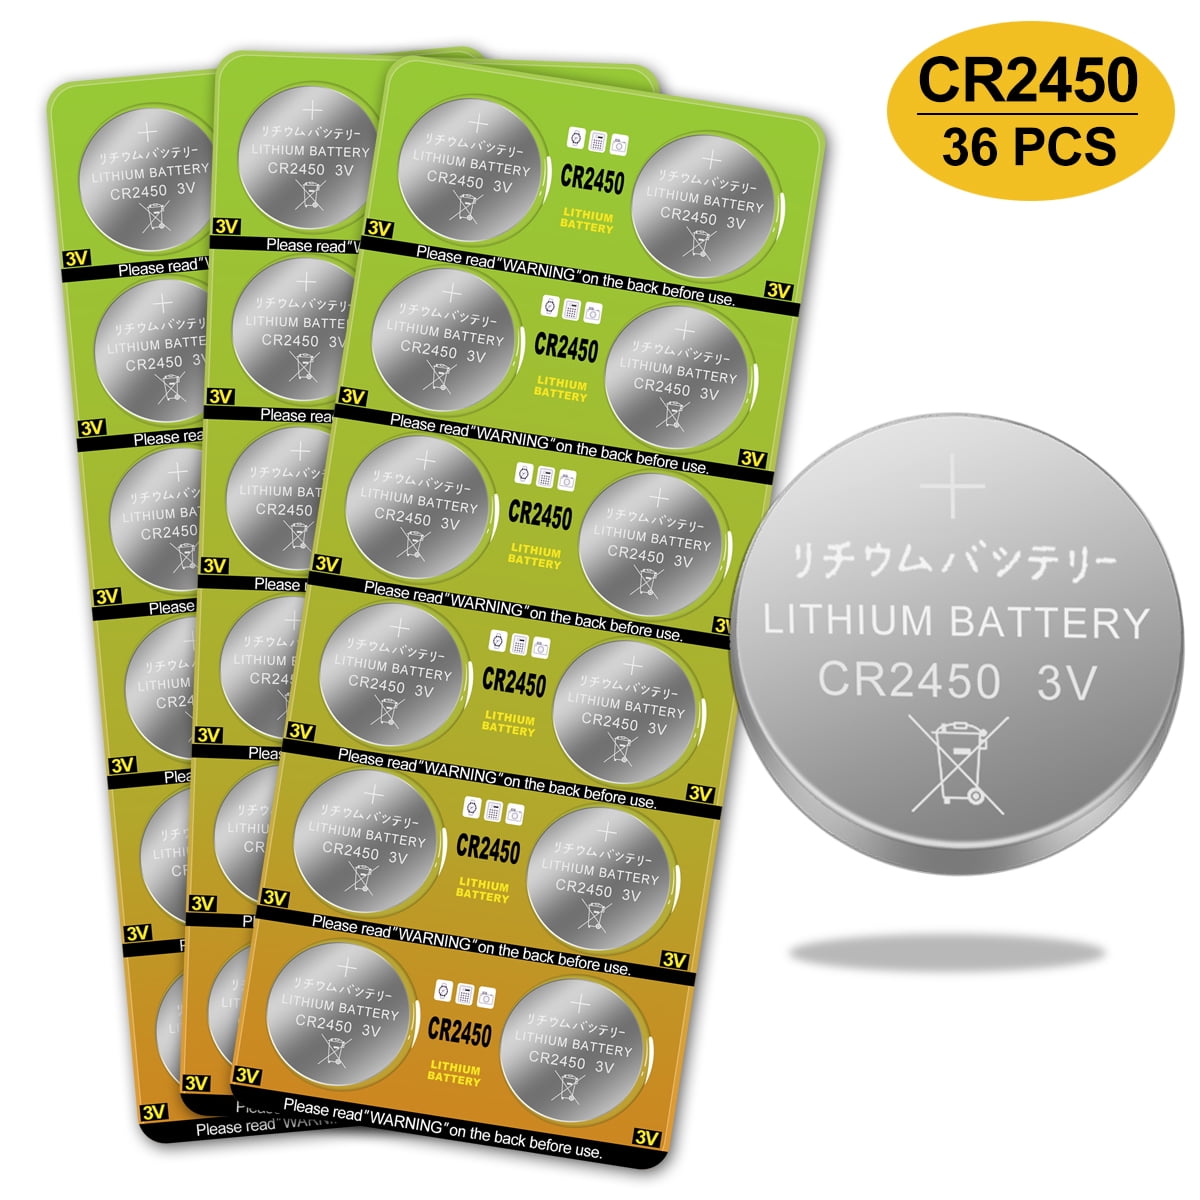 CR2450 Battery 3v Lithium Coin Cell Batteries - High Capacity 700mAh Button  Cell Battery for Flameless Tea Light Candles, Remote, Window Sensor 36